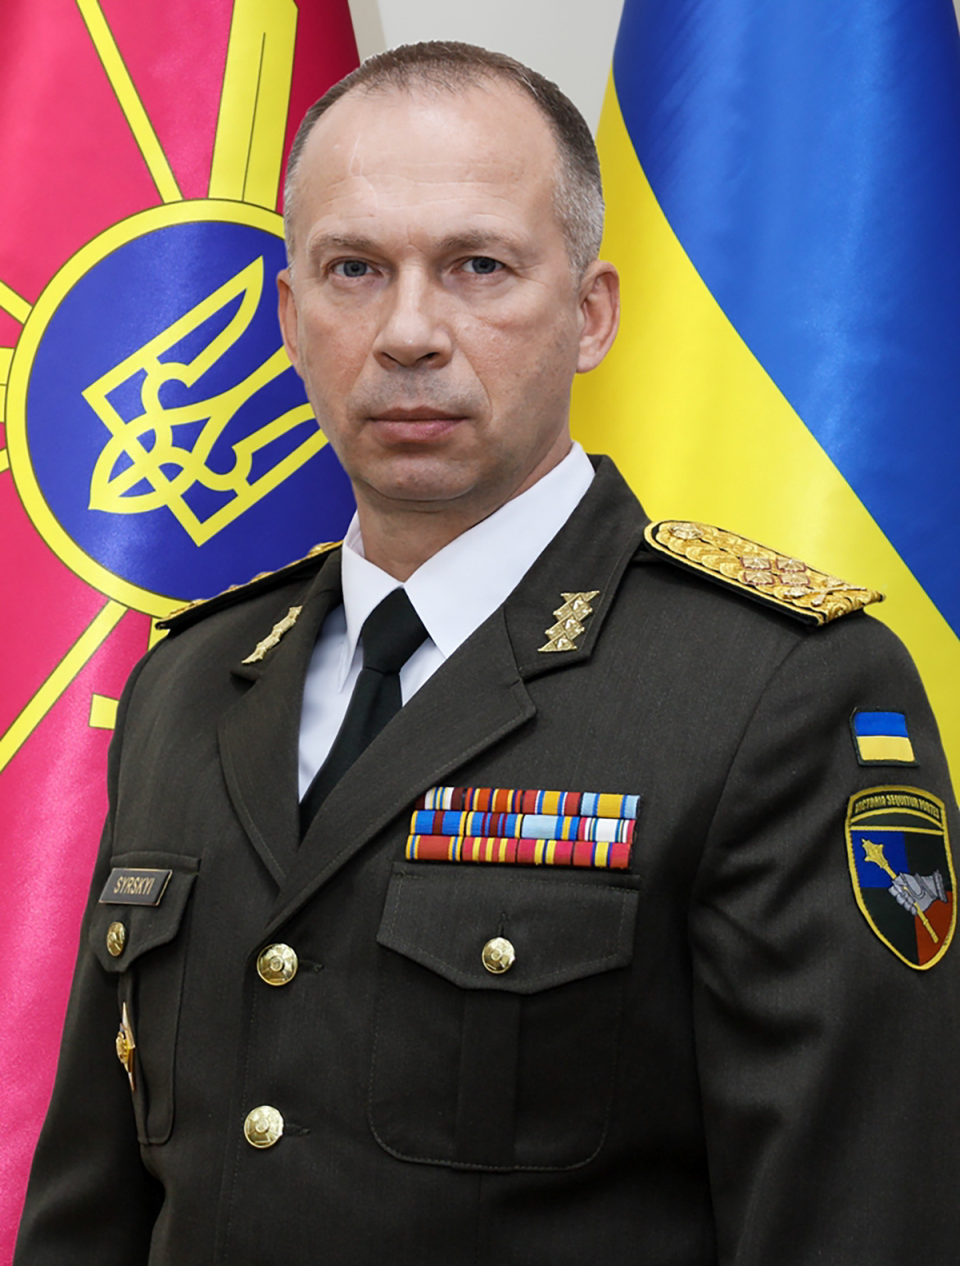 Oleksandr Syrsky is the new Commander-in-Chief of Ukraine's Armed Forces (AP)